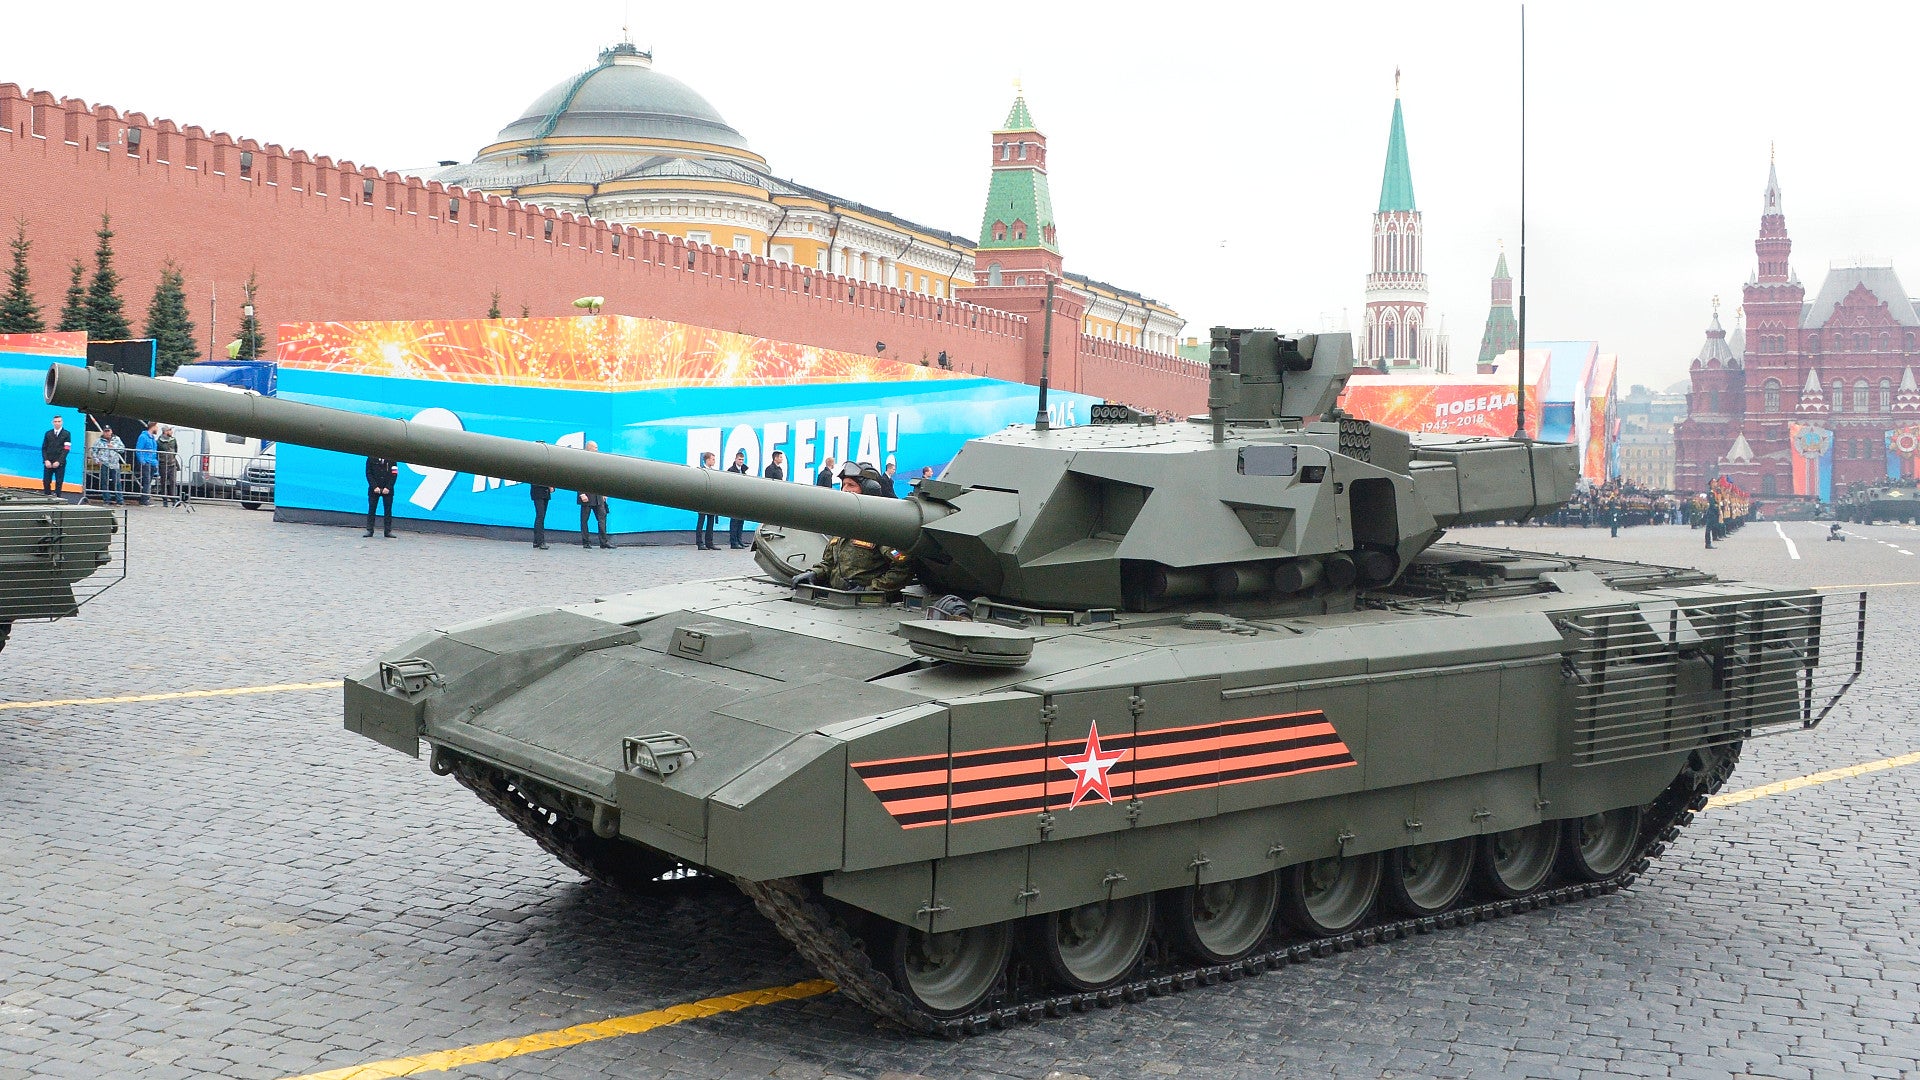 Russia Can’t Afford Its New T-14 Armata Tanks, Turns To Updated Older Designs Instead